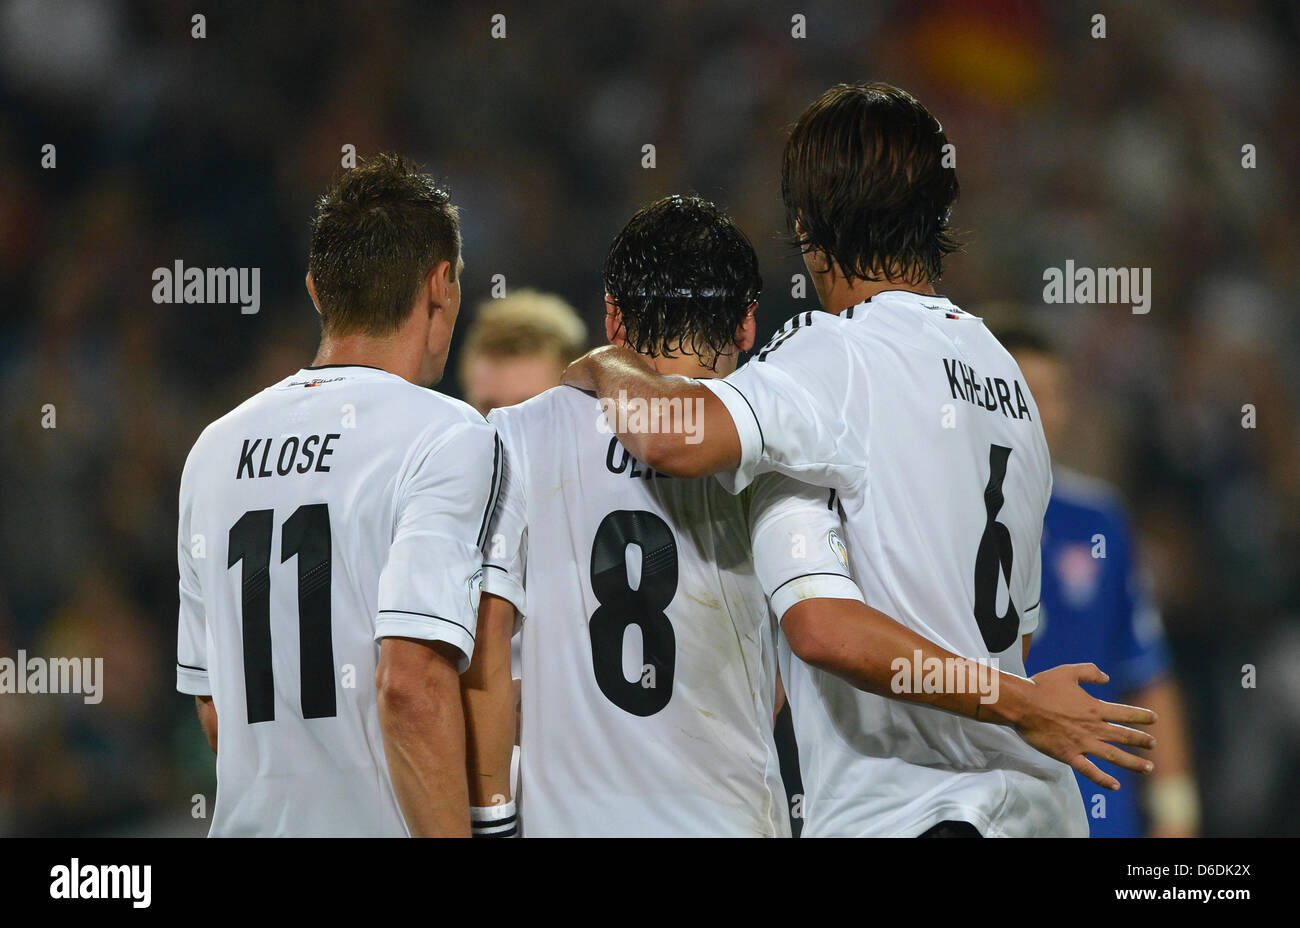 Germany's Mesut Oezil (C) celebrates after scoring the goal 3-0 with team mates Miroslav Klose (L) and Sami Khedira during the Group C World Cup 2014 qualifying match between Germany and Faroe Islands at AWD Arena in Hanover, Germany, 07 September 2012. Photo: Marcus Brandt dpa/lno  +++(c) dpa - Bildfunk+++ Stock Photo